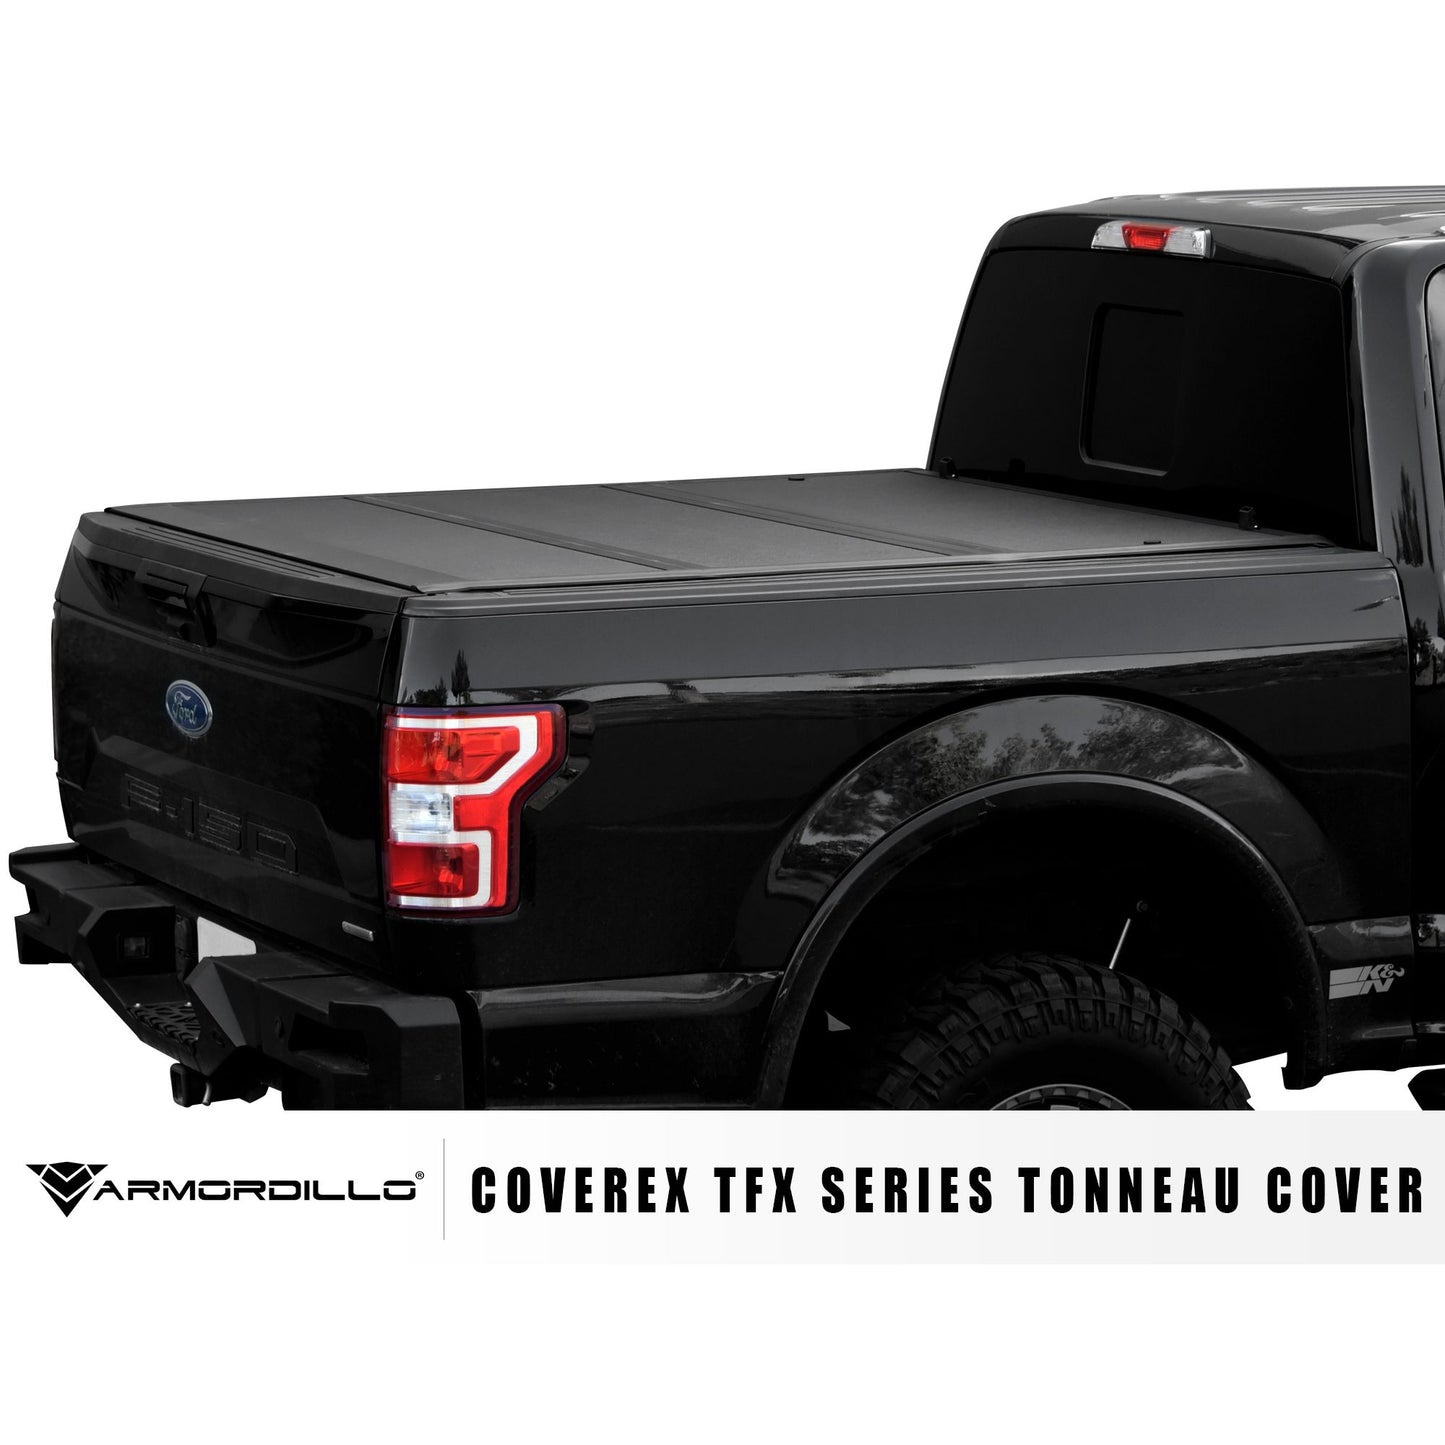 Armordillo 2000-2003 Toyota Tundra CoveRex TFX Series Folding Truck Bed Tonneau Cover (6.2 Ft Bed) 8705346